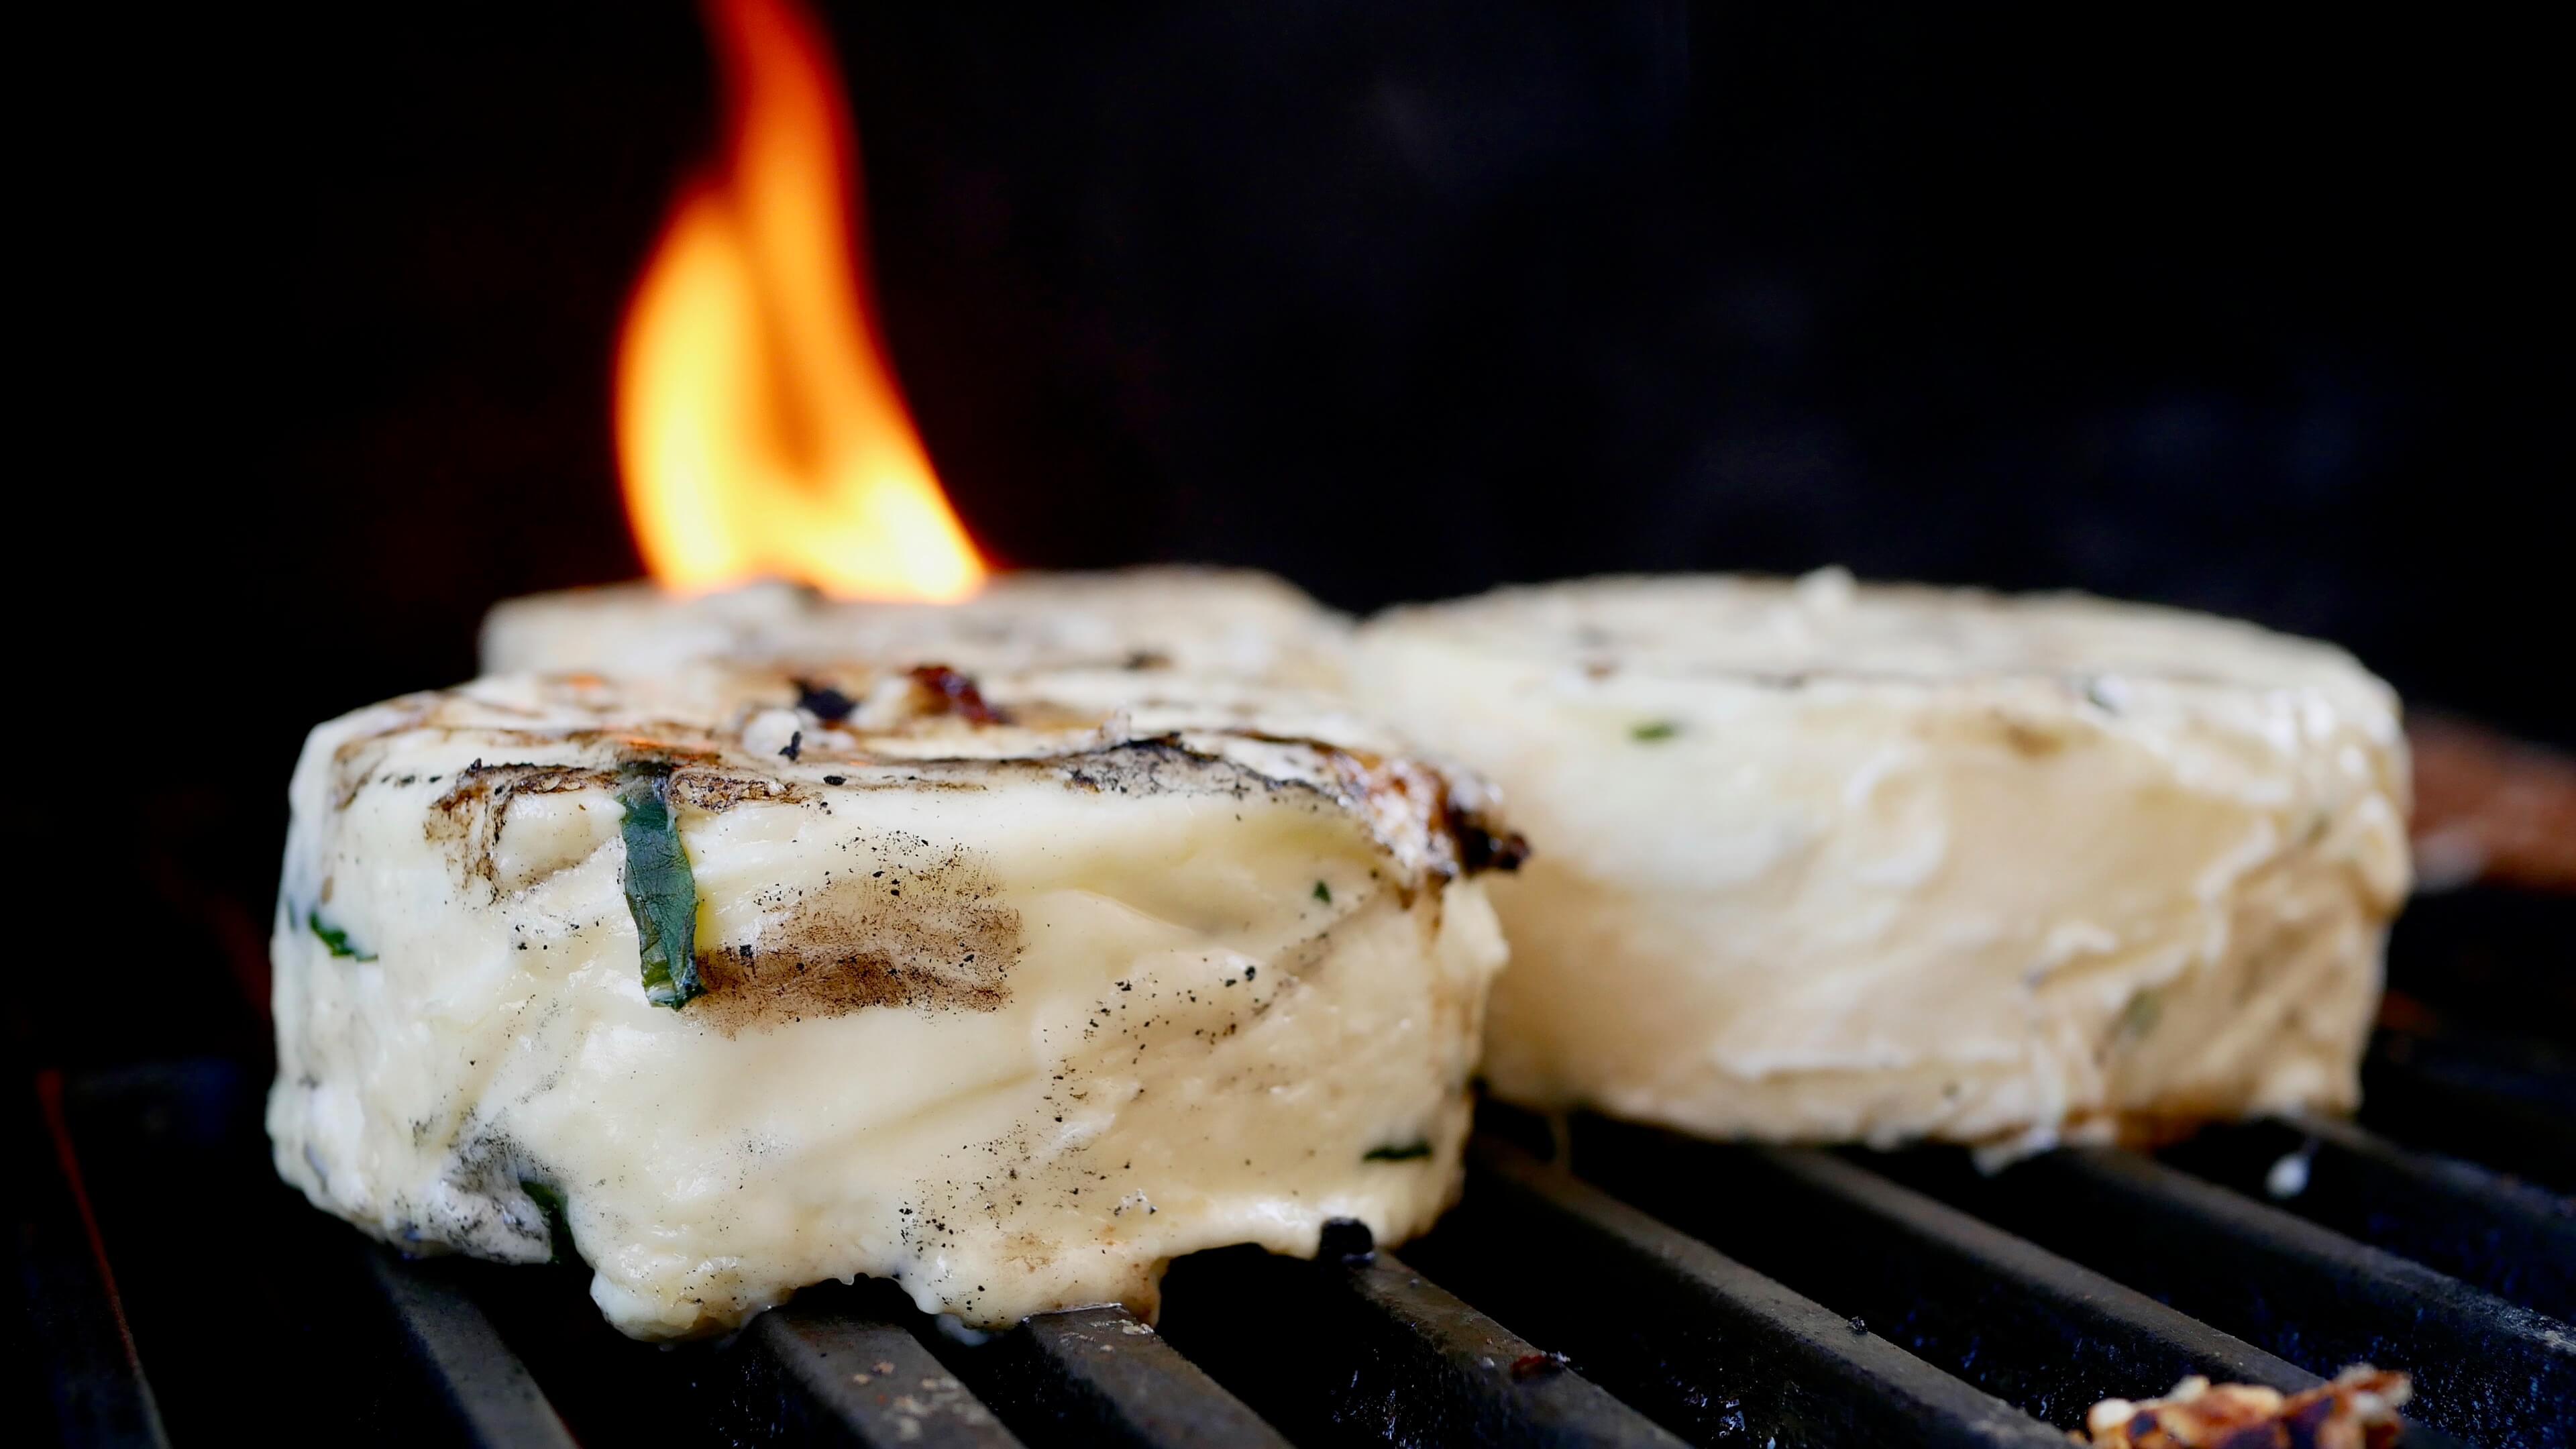 /user/pages/07blog/10fromage a griller/actus tomme grill 1 - Thomas Herren